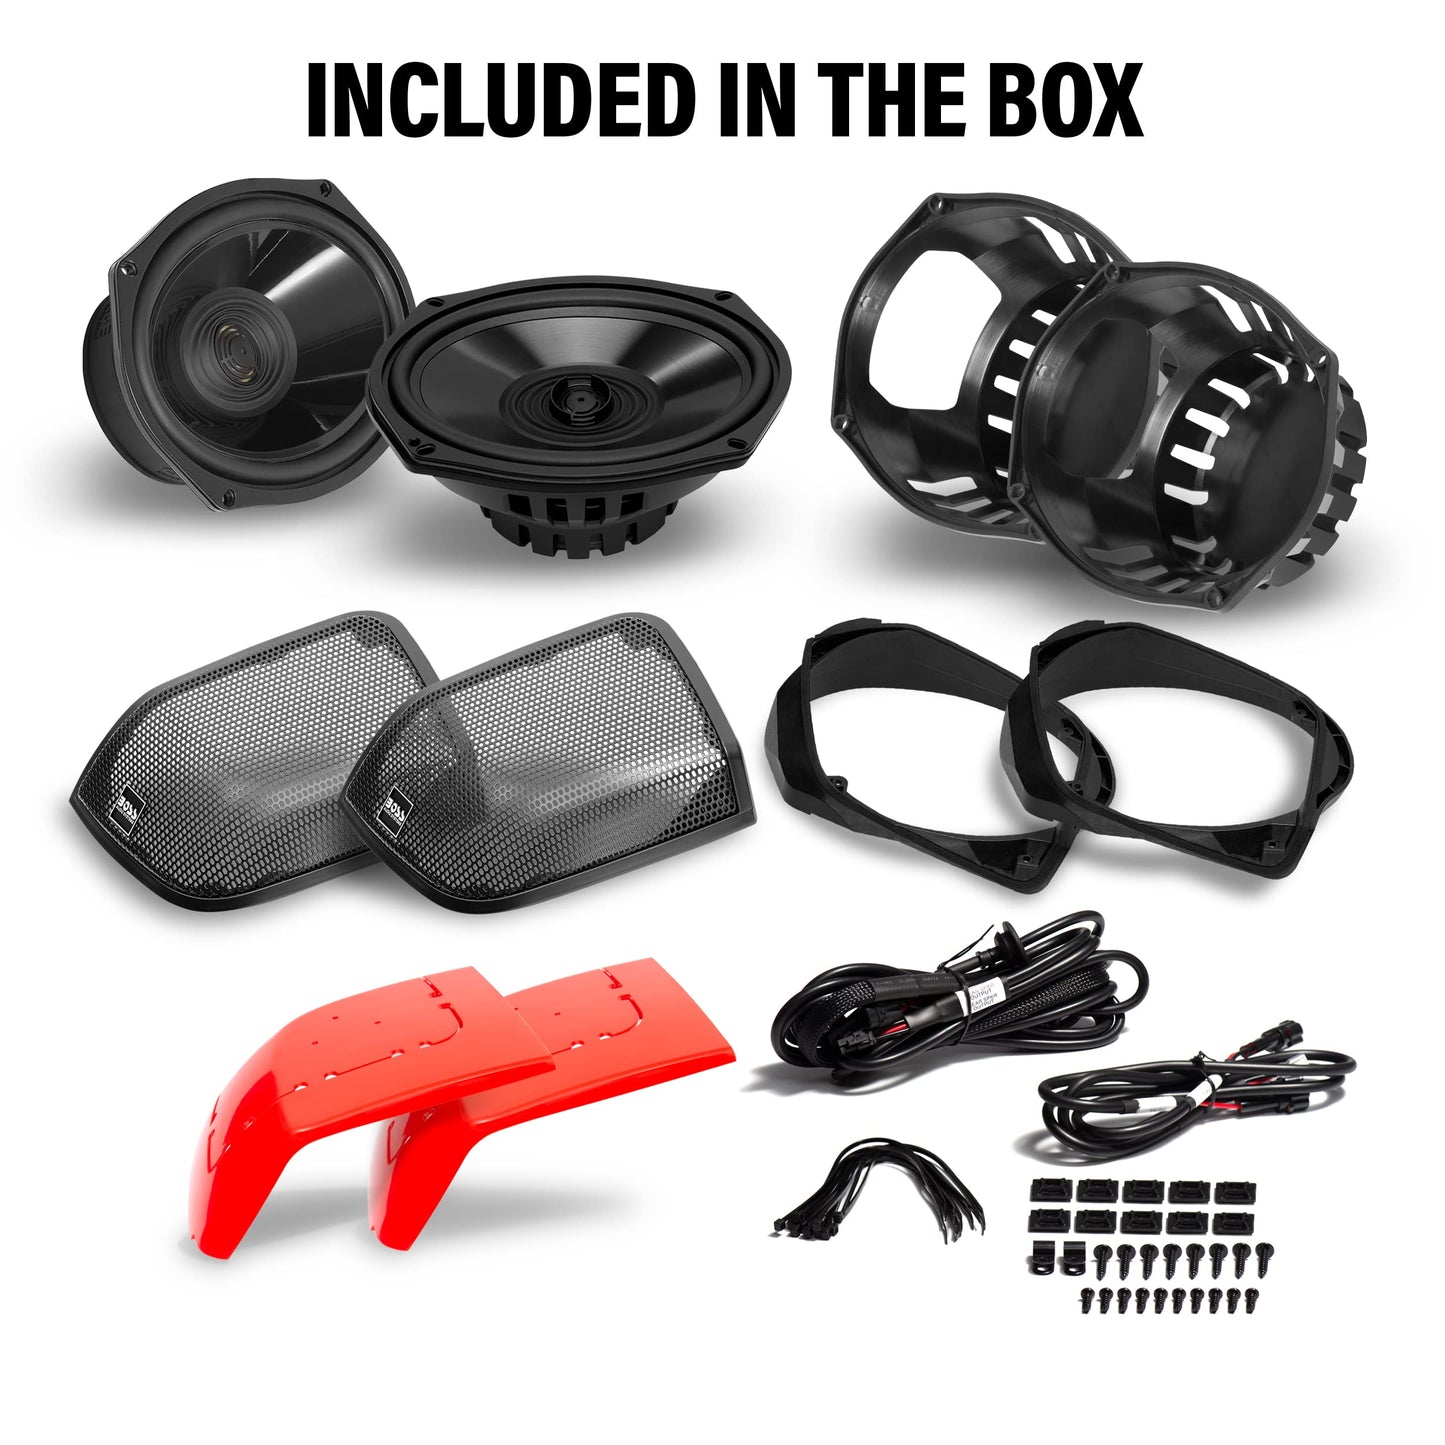 BOSS Audio Systems BHD14 Harley Davidson 6 x 9 Inch Saddlebag Speaker Kit – Fits Select 2014+ Road Glide and Street Glide Motorcycles, 300 Watts of Power Per Pair, Full Range, 2 Way, Sold in Pairs